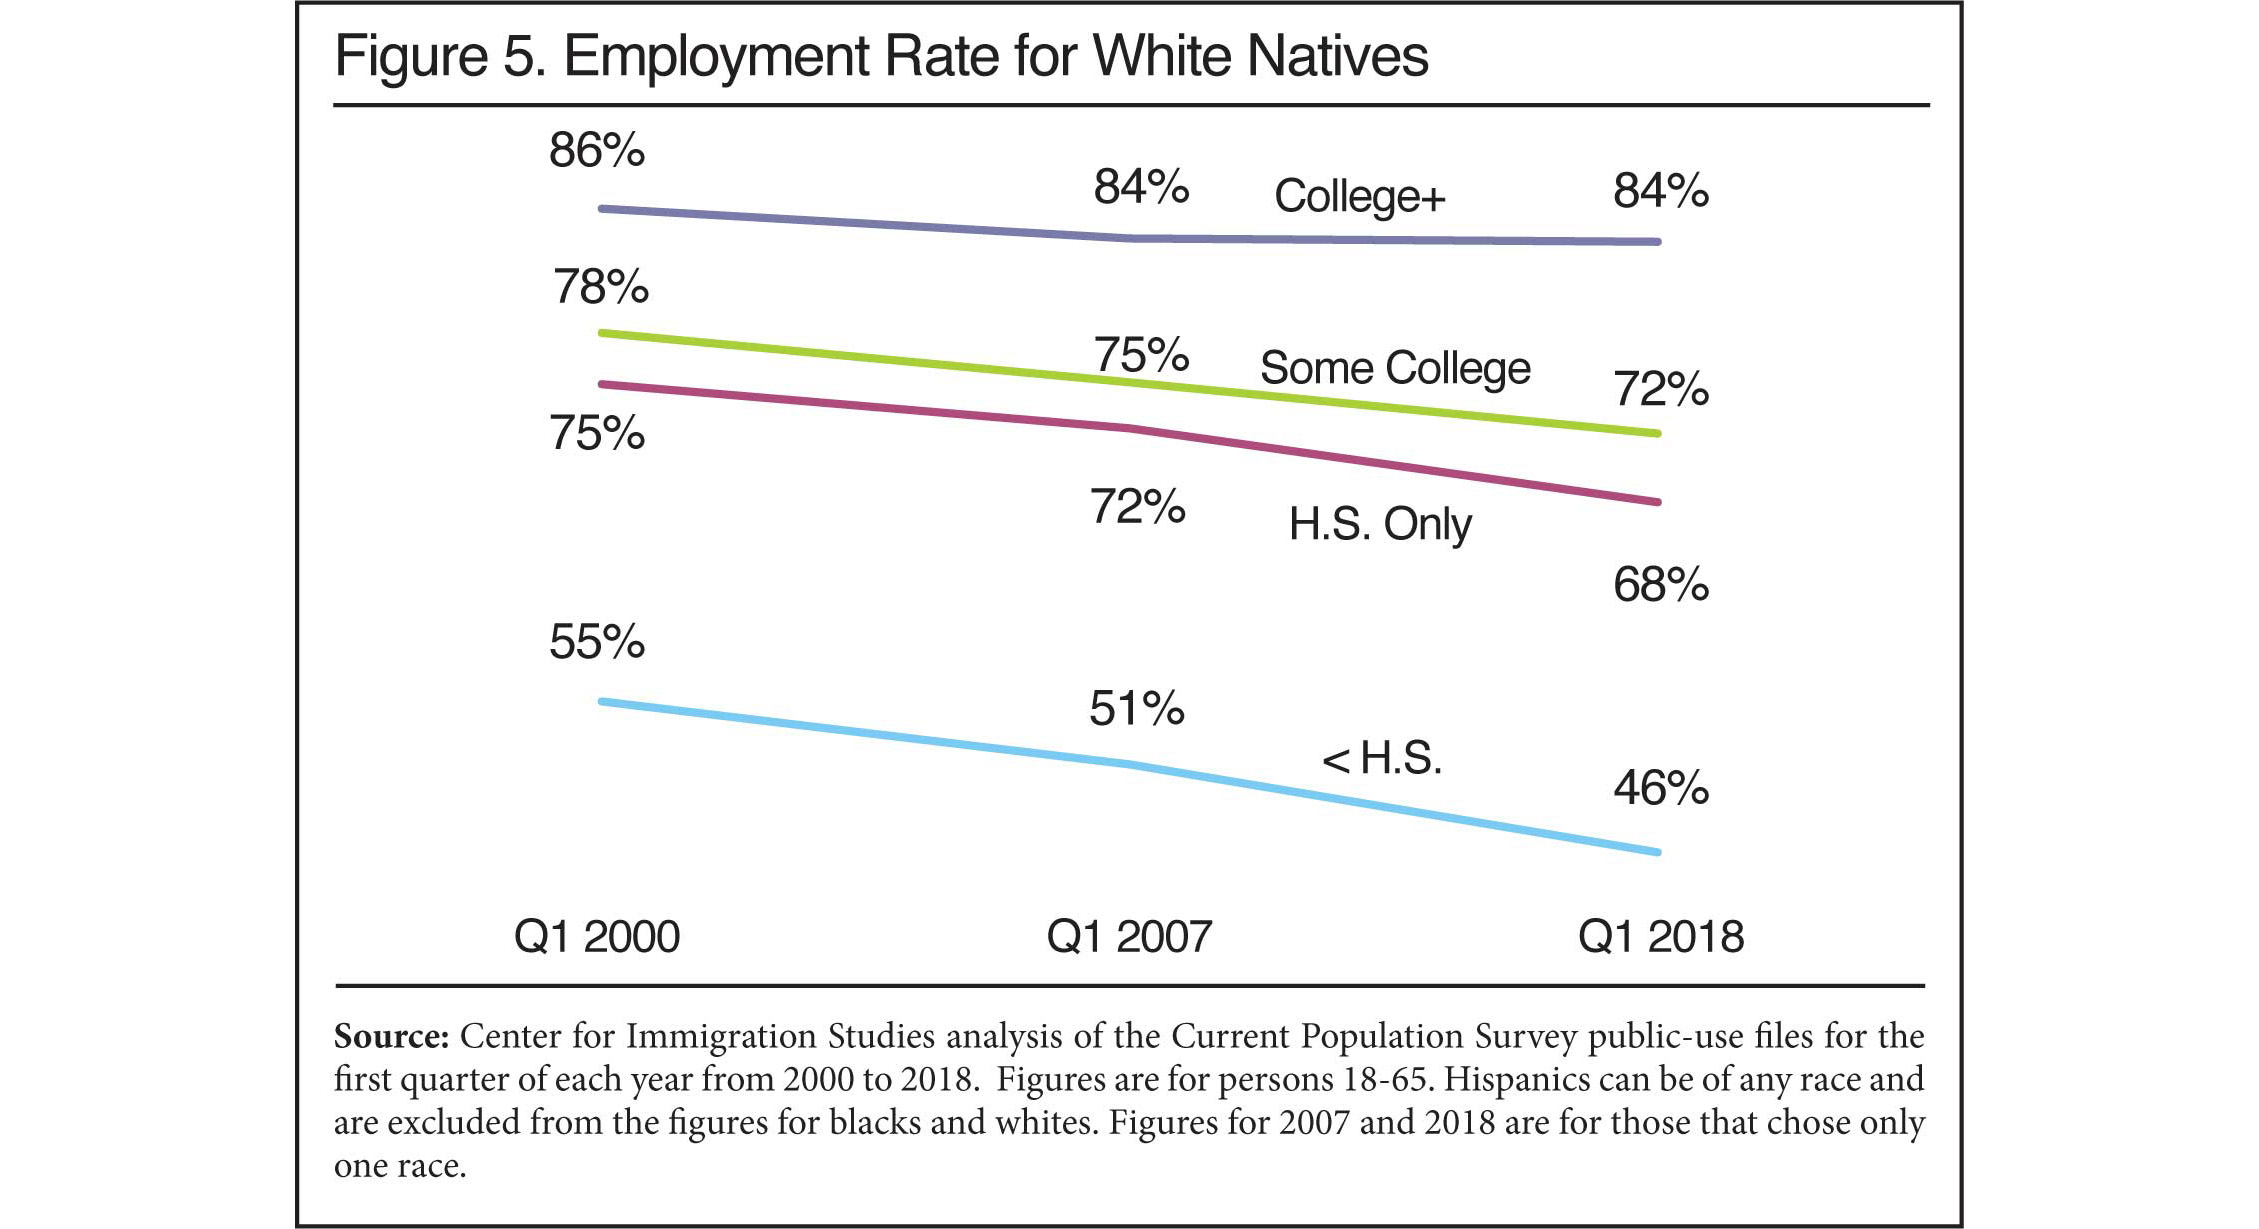 Graph: Employment Rate for White Natives, 2000 to 2018